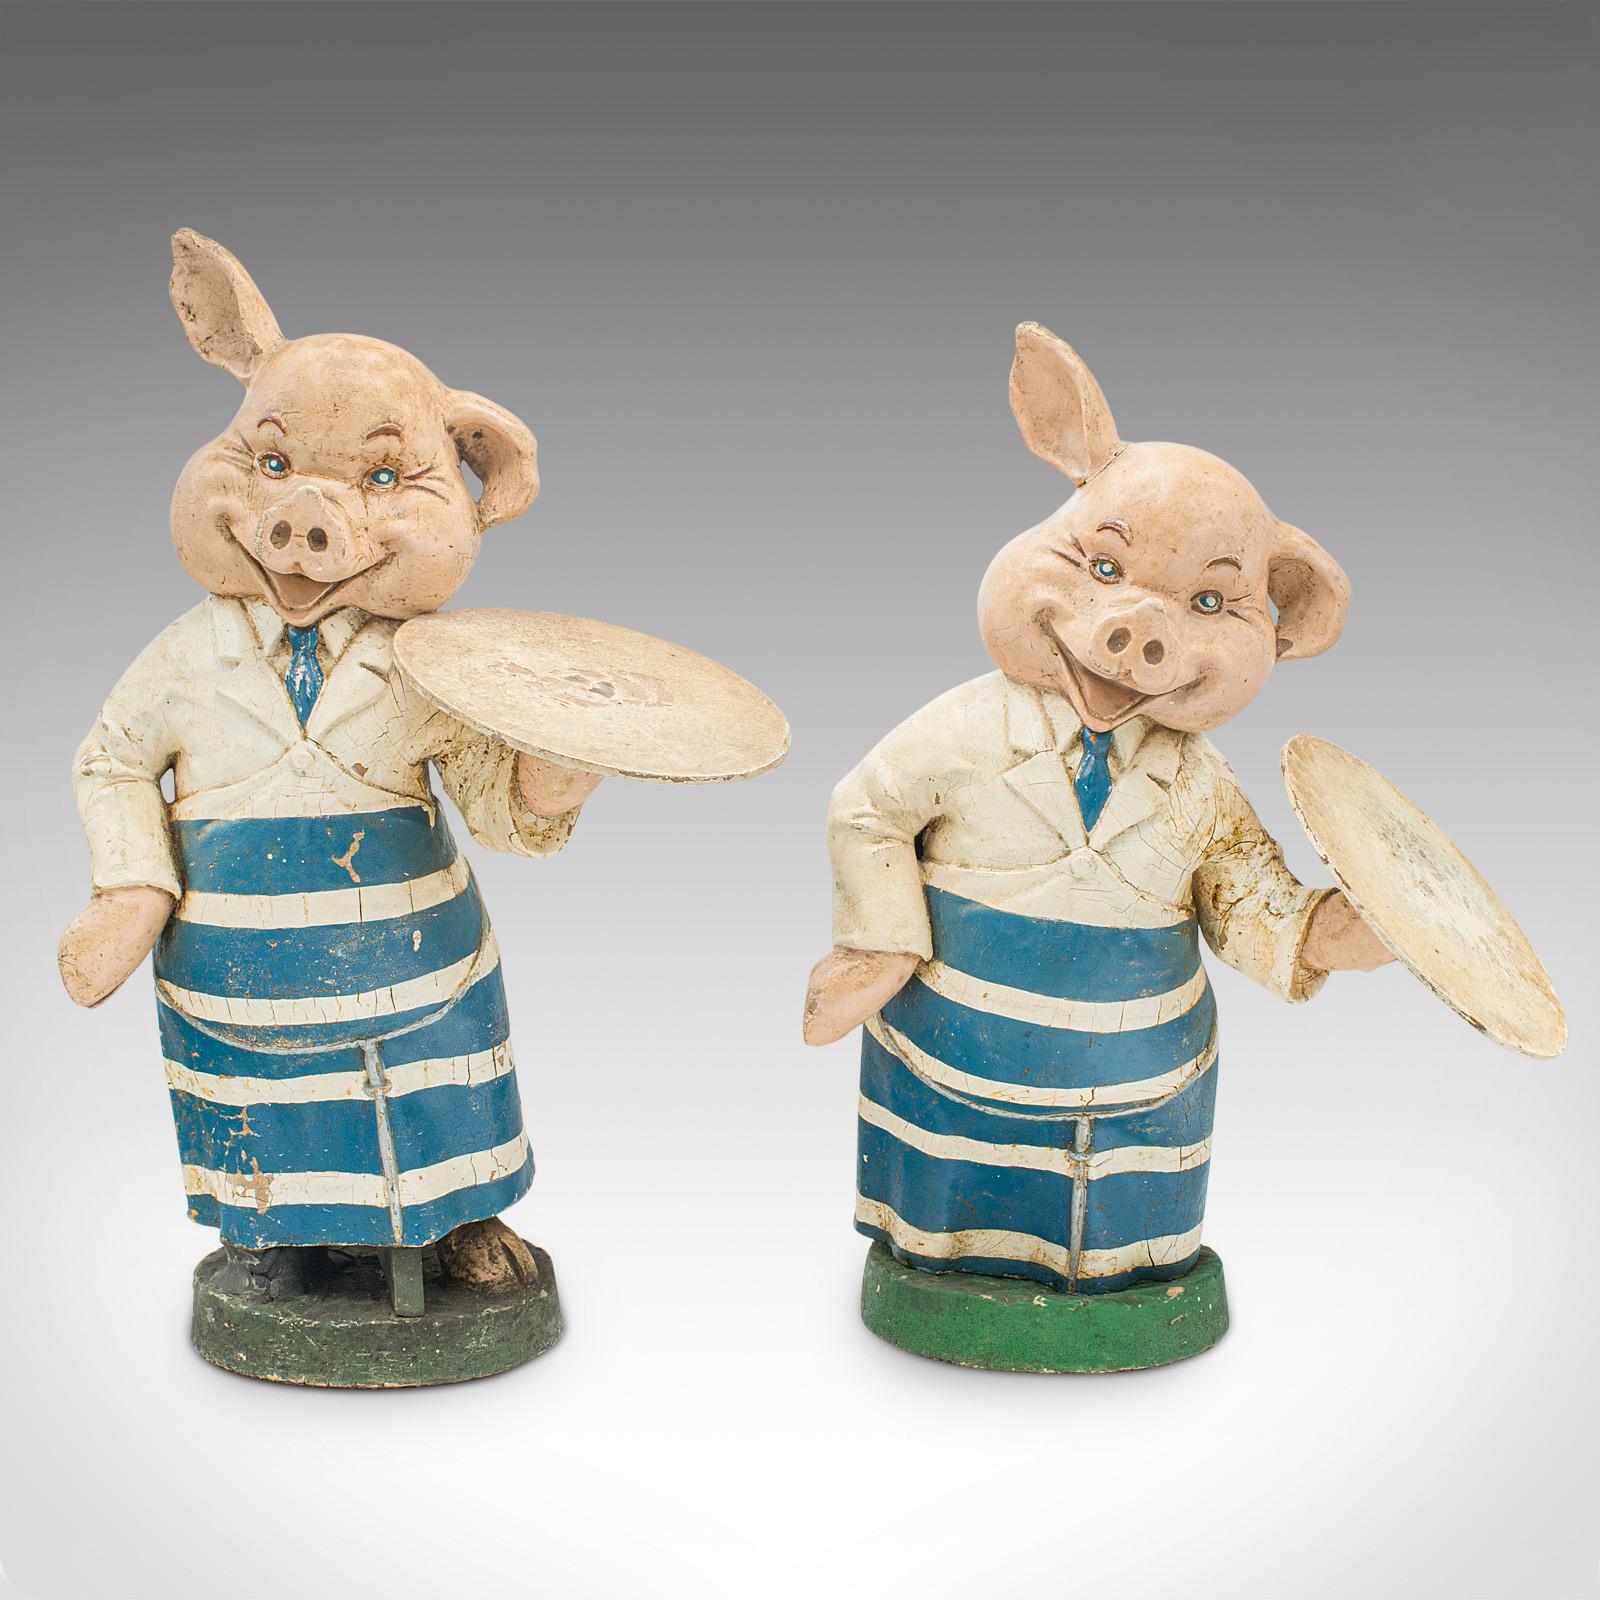 This is a pair of antique decorative butchery pigs. An English, plaster shop display figure, dating to the Edwardian period, circa 1910.

Rare and unusual pair of display pigs in appealingly original order
Displaying a desirable aged patina